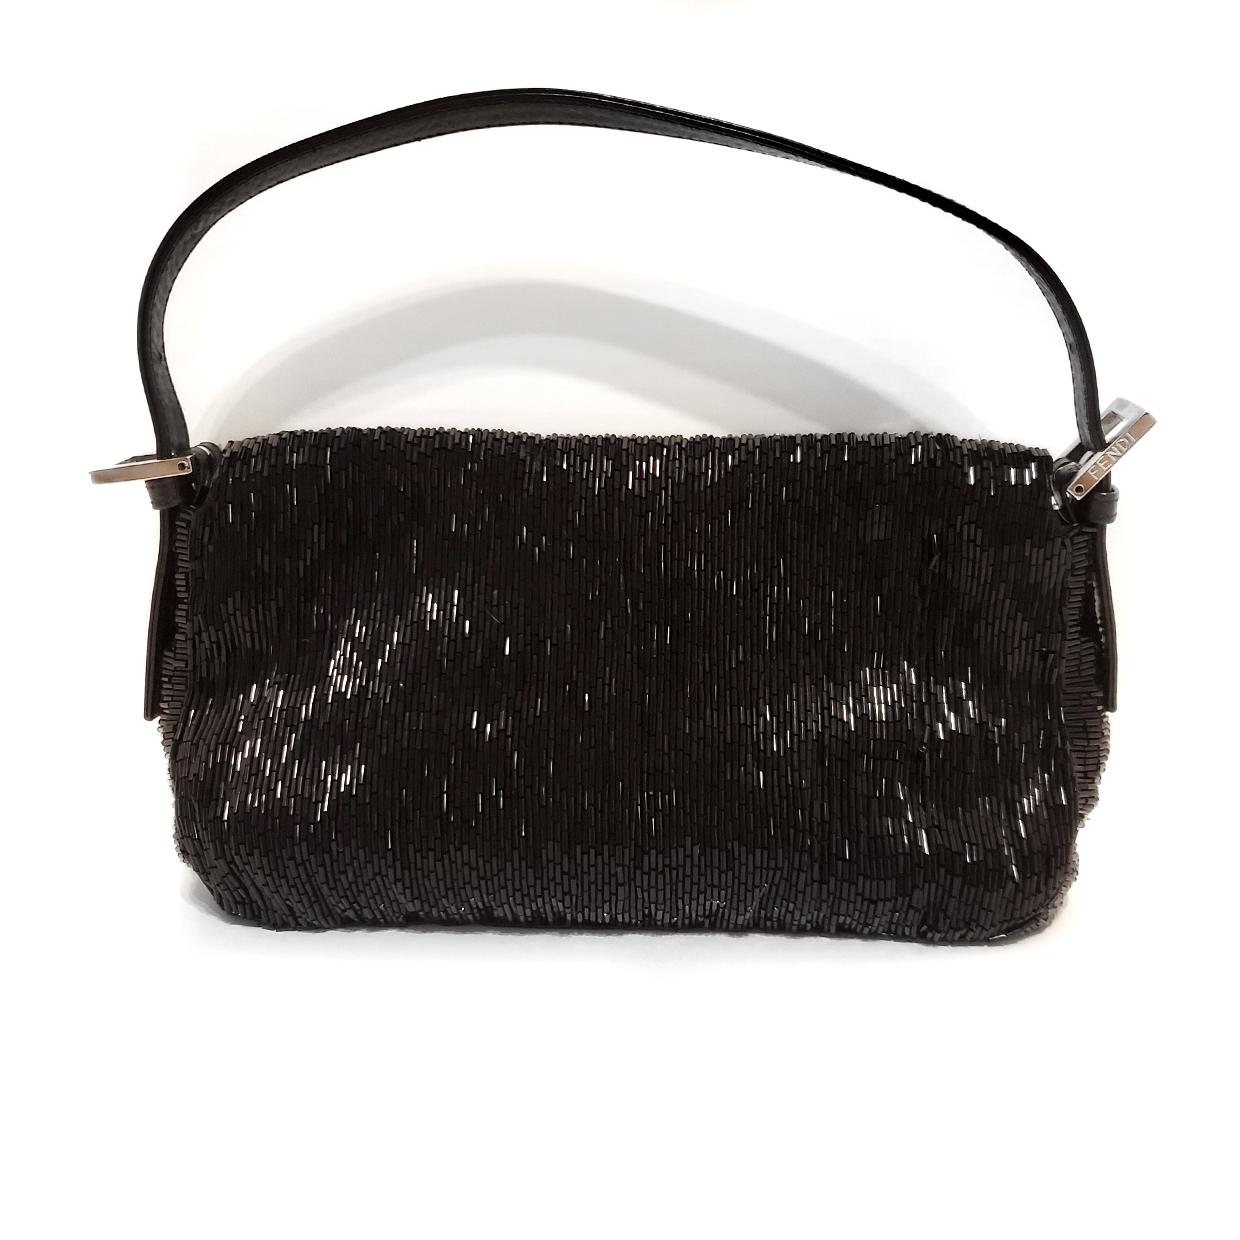 Brand - Fendi
Collection - Beaded
Estimated Retail - $2,400.00
Style - Baguette
Material - Leather Trimmed
Color - Black
Closure - Snap
Hardware Material - Silvertone
Comes With - Dustbag
Size - Small
Feature - Inner Pockets
Accent - Beaded
Product